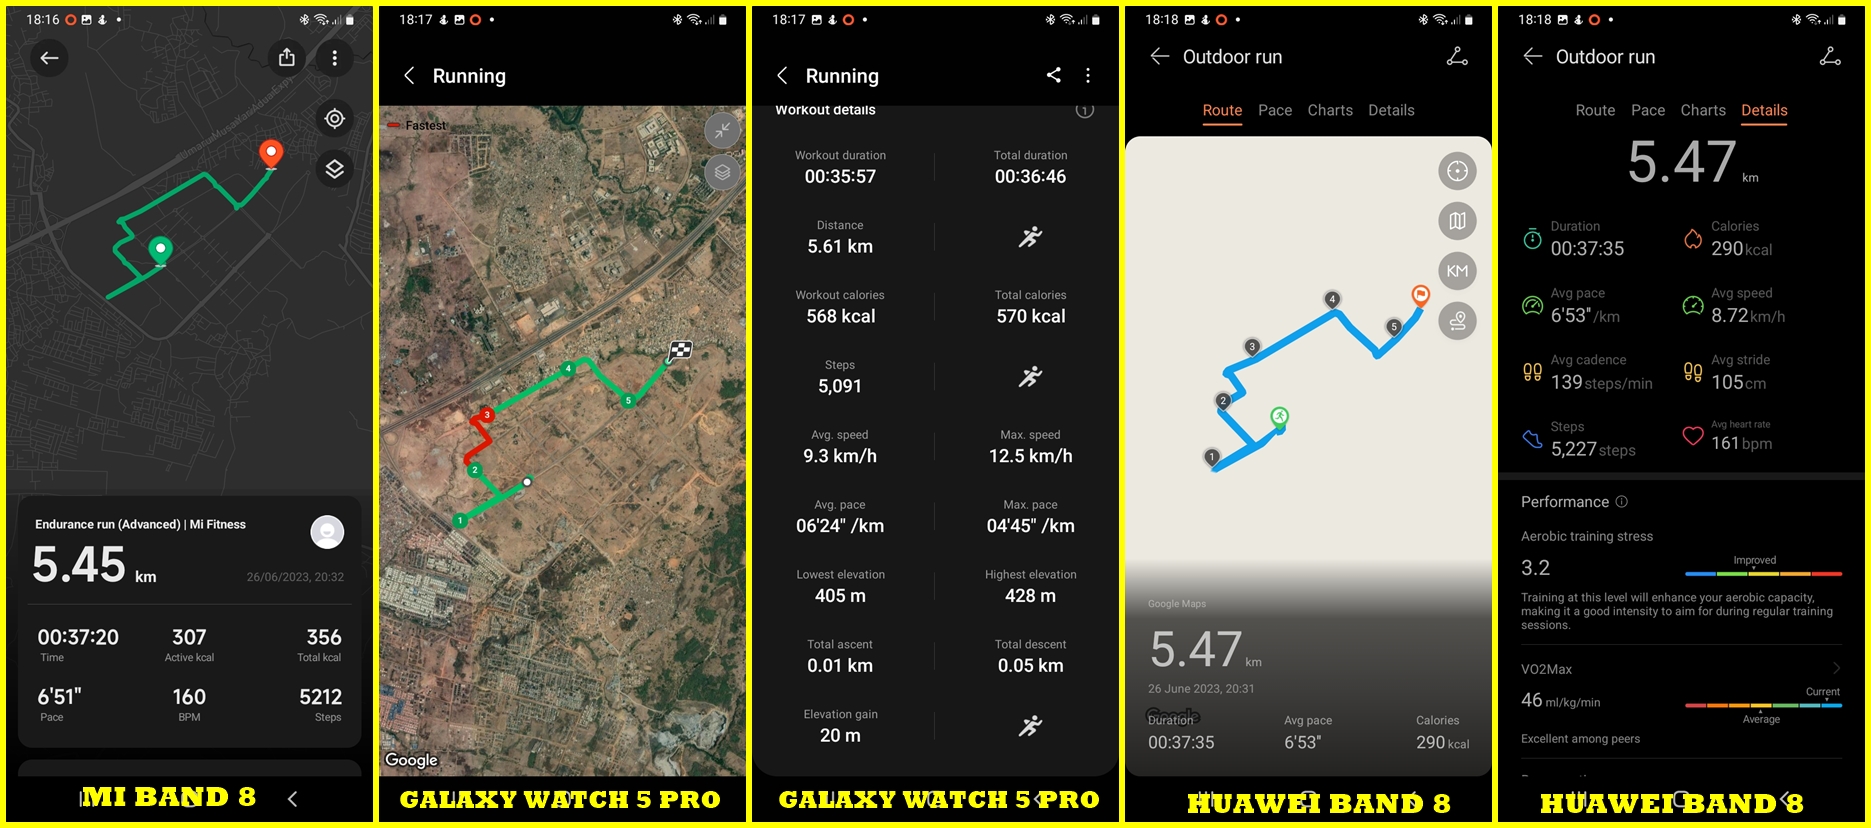 Route mapping accuracy test -Galaxy Watch 5 Pro vs Huawei Band 8